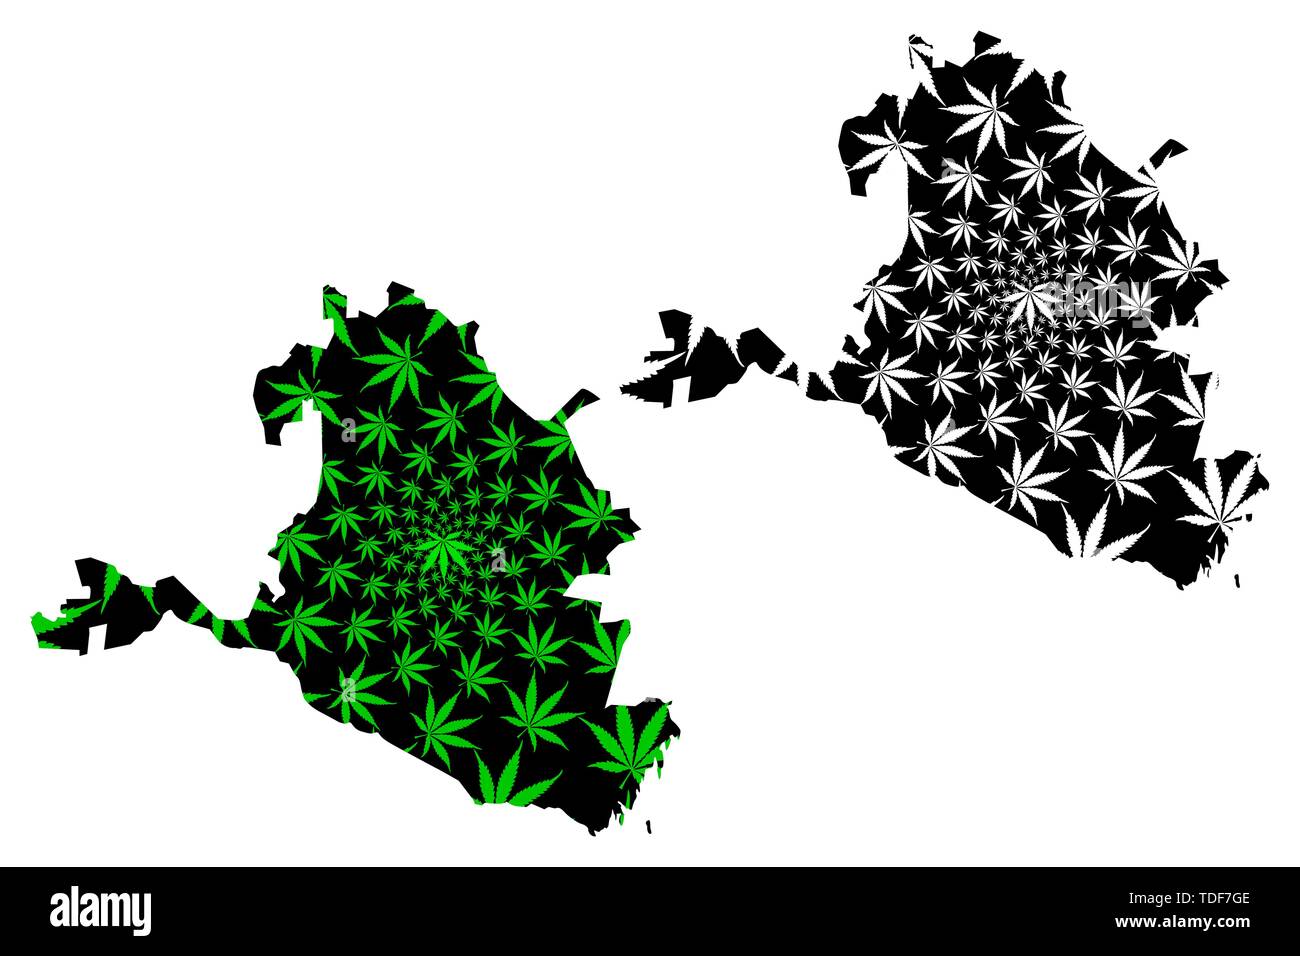 Kalmykia (Russia, Subjects of the Russian Federation, Republics of Russia) map is designed cannabis leaf green and black, Republic of Kalmykia map mad Stock Vector